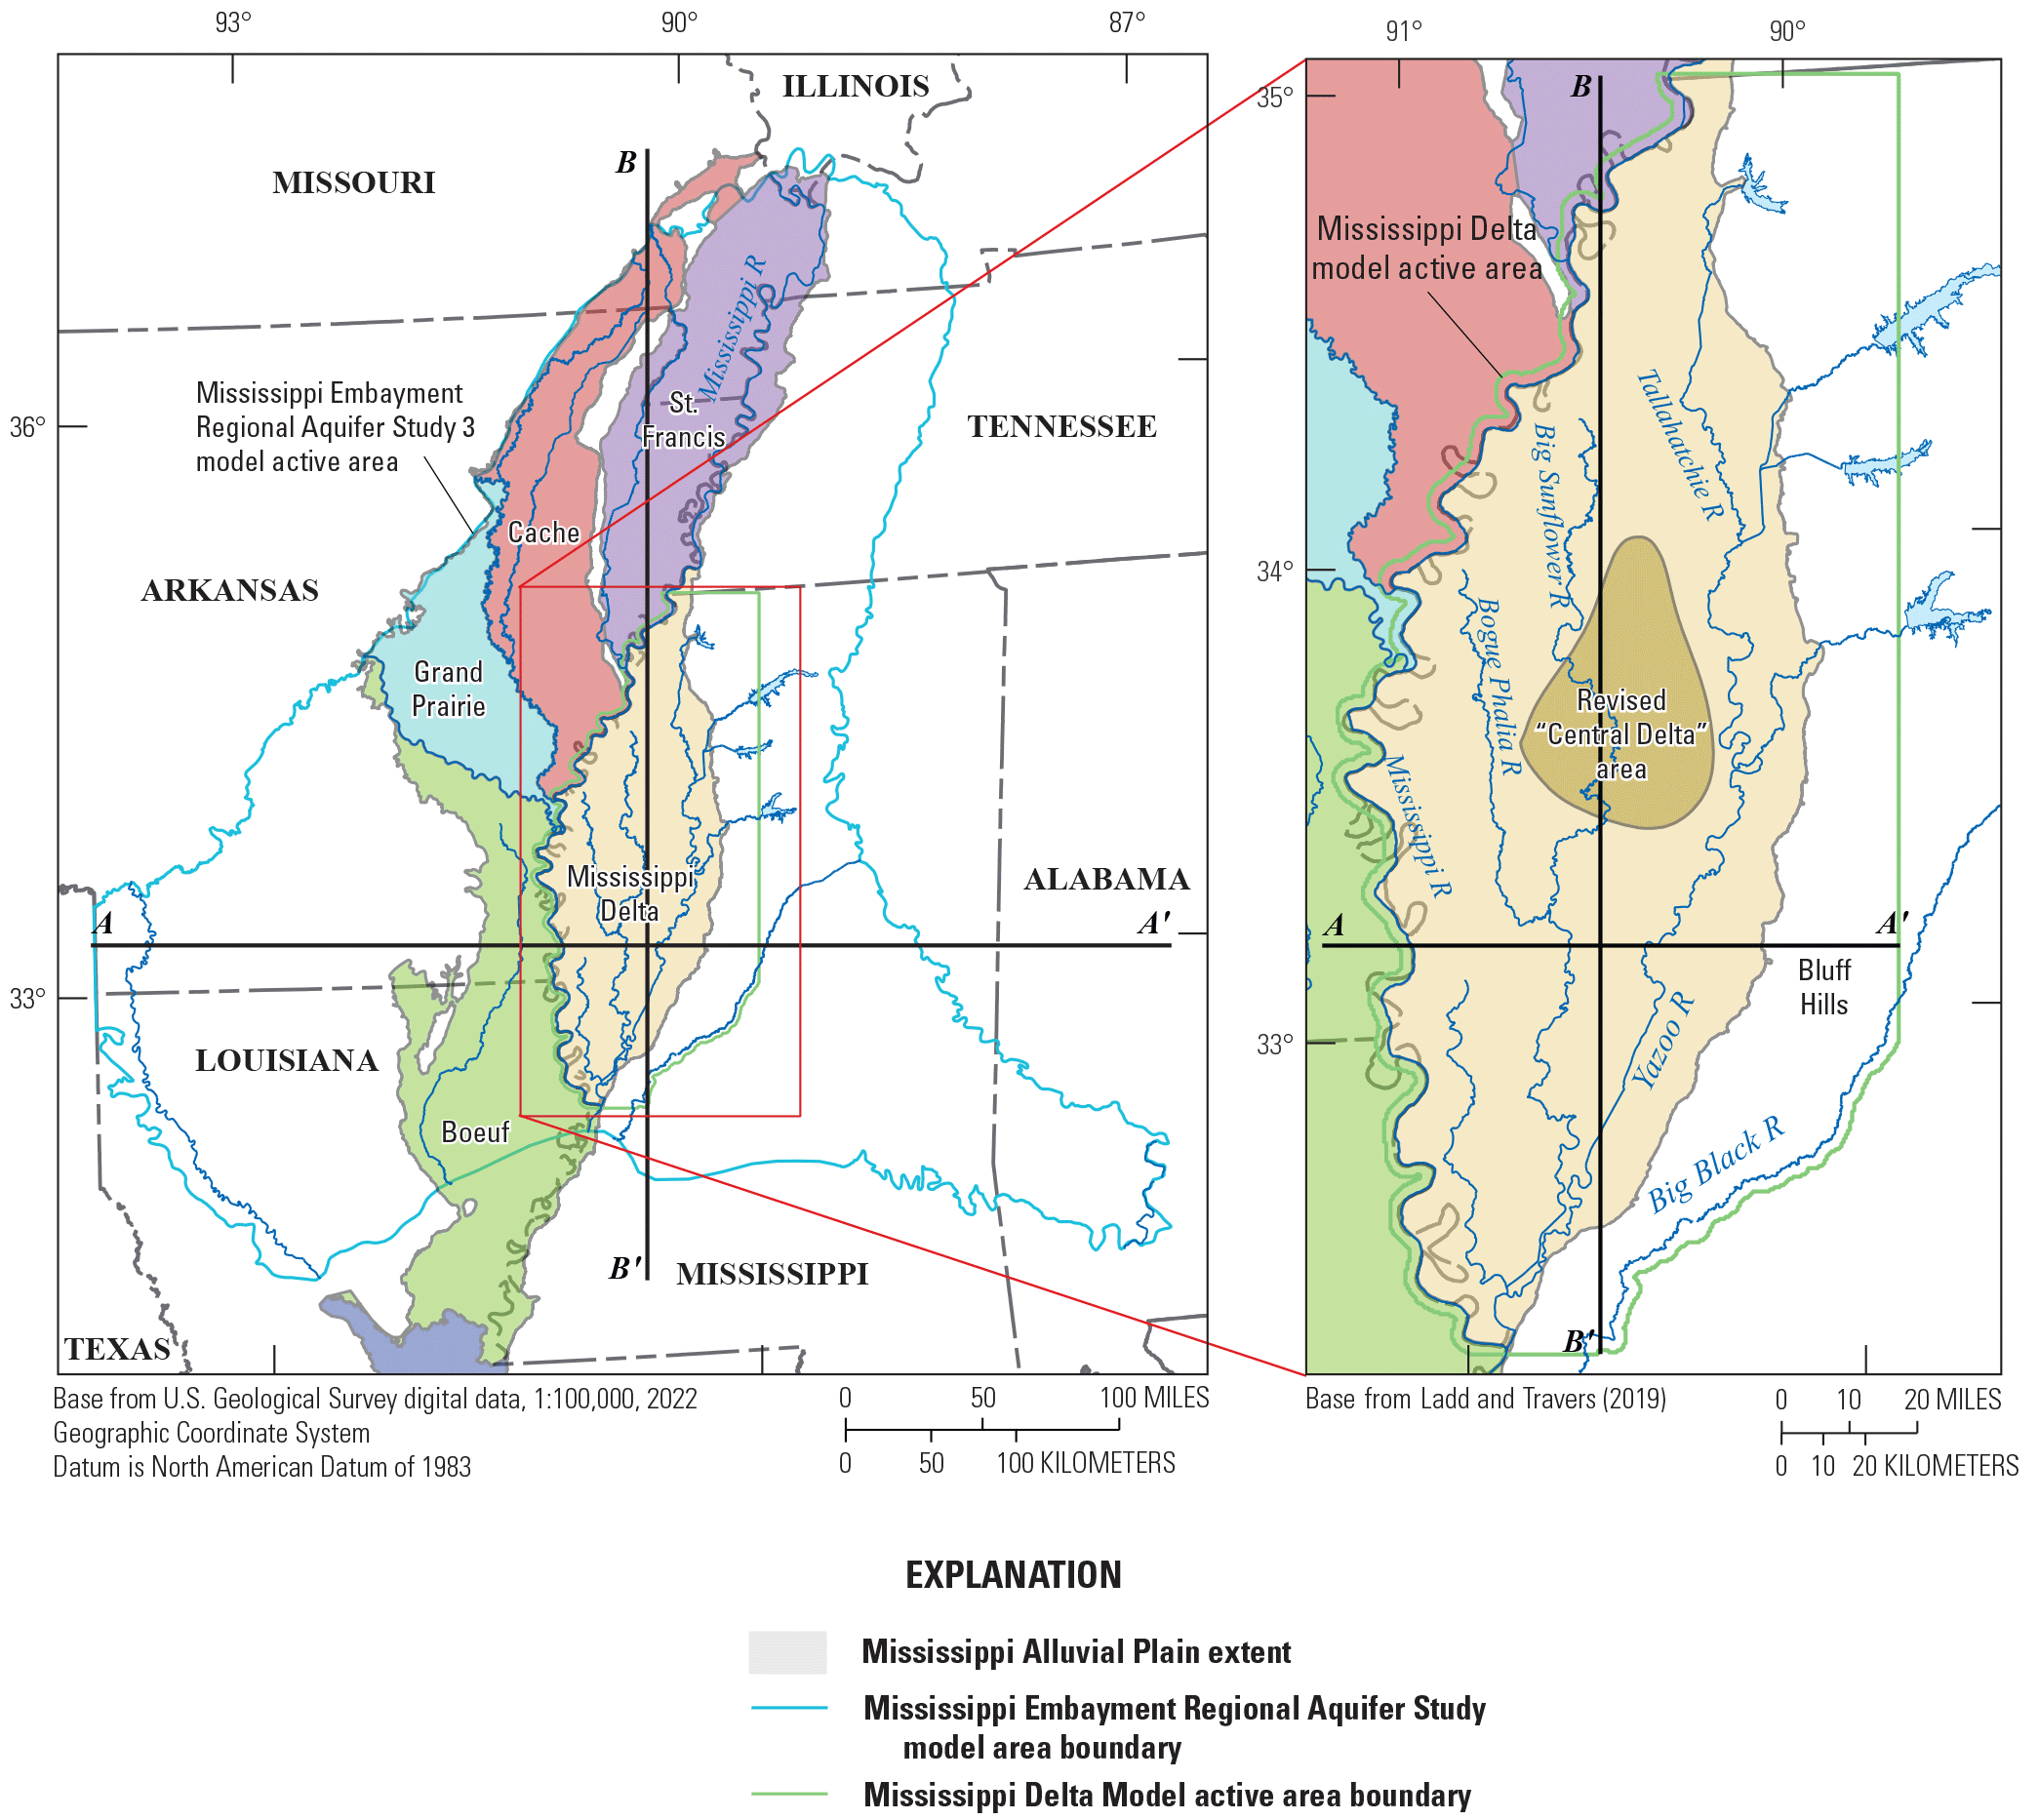 The Mississippi Alluvial Plain can be divided into the Cache, Grand Prairie, Boeuf,
                     Mississippi Delta, and St. Francis sub-regions.